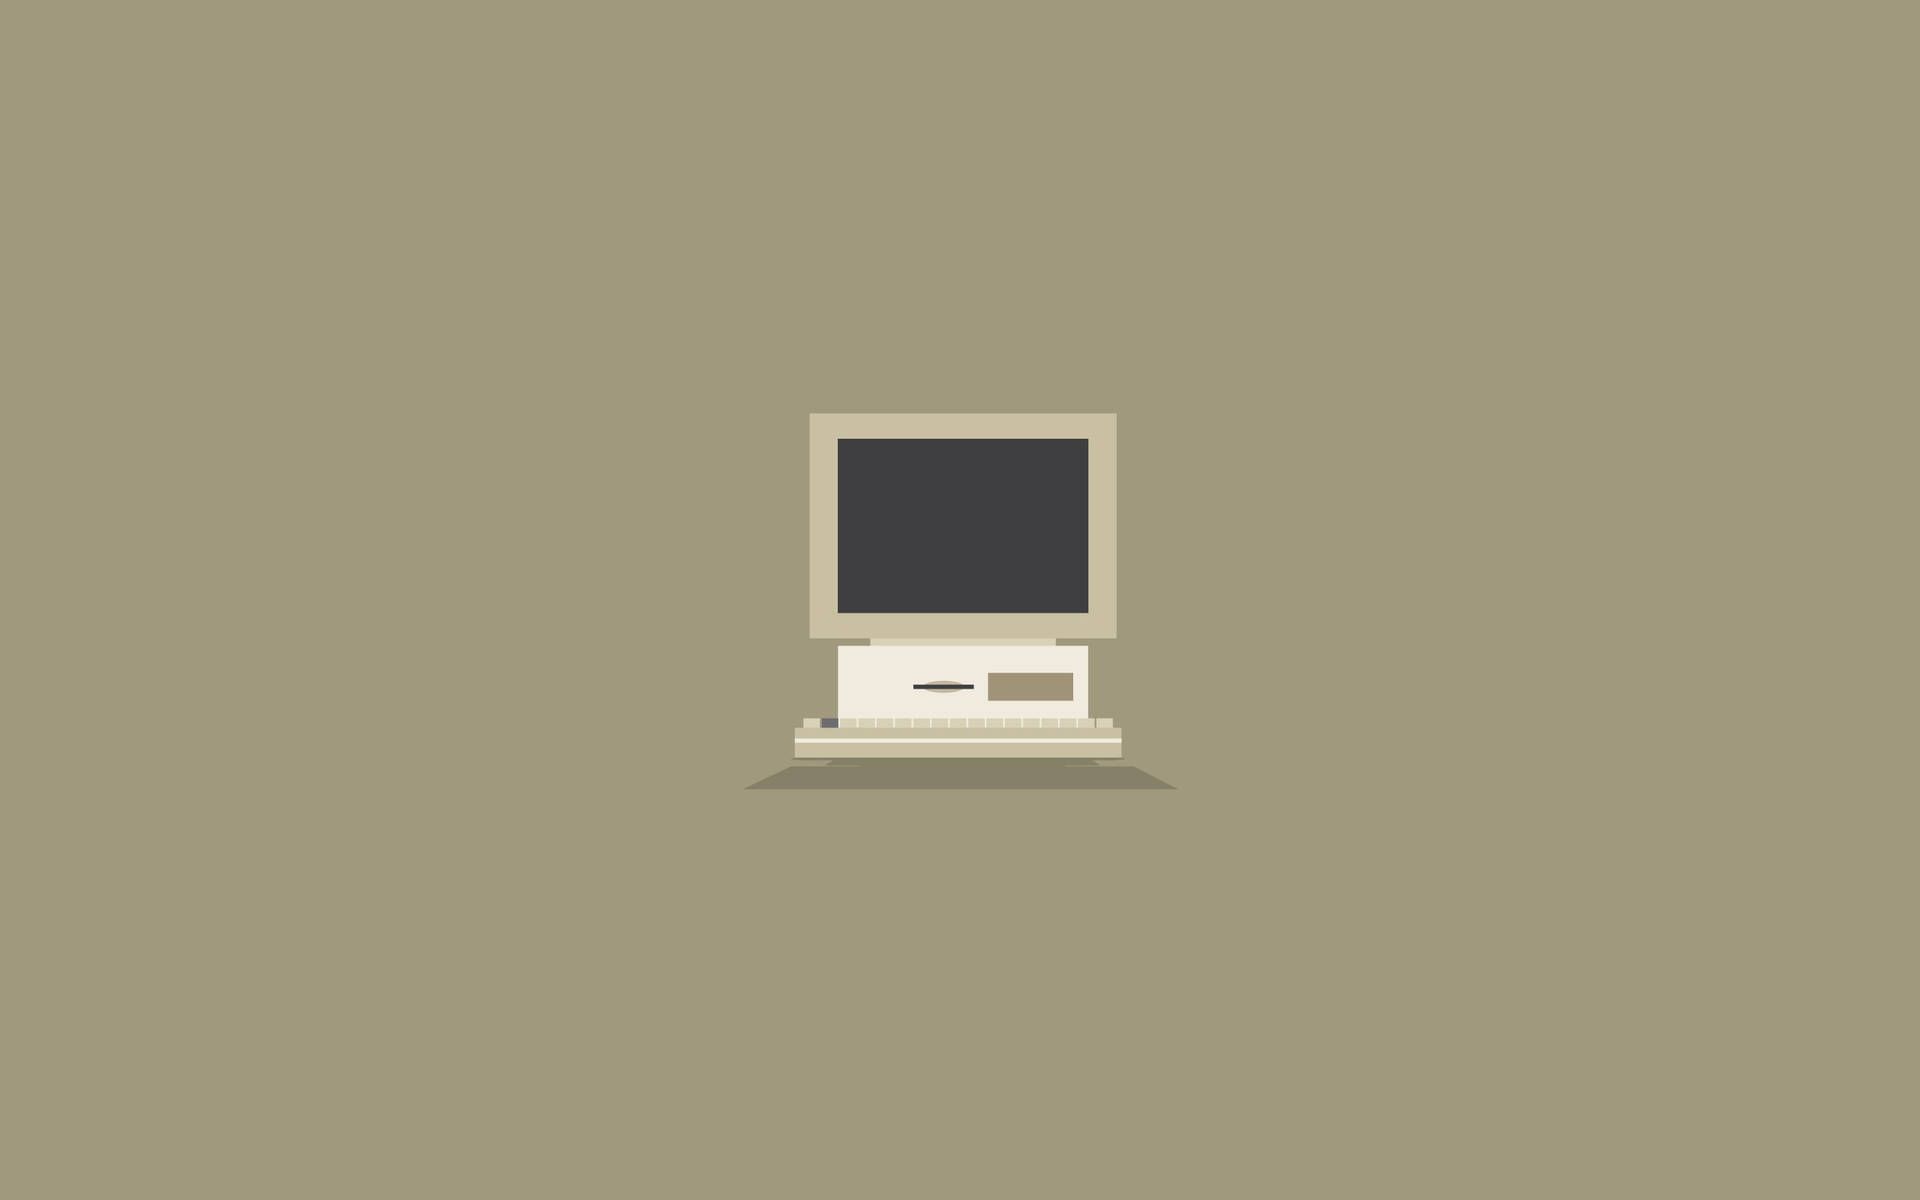 HD wallpaper text vintage floppy disk simple minimalism simple  background  Wallpaper Flare